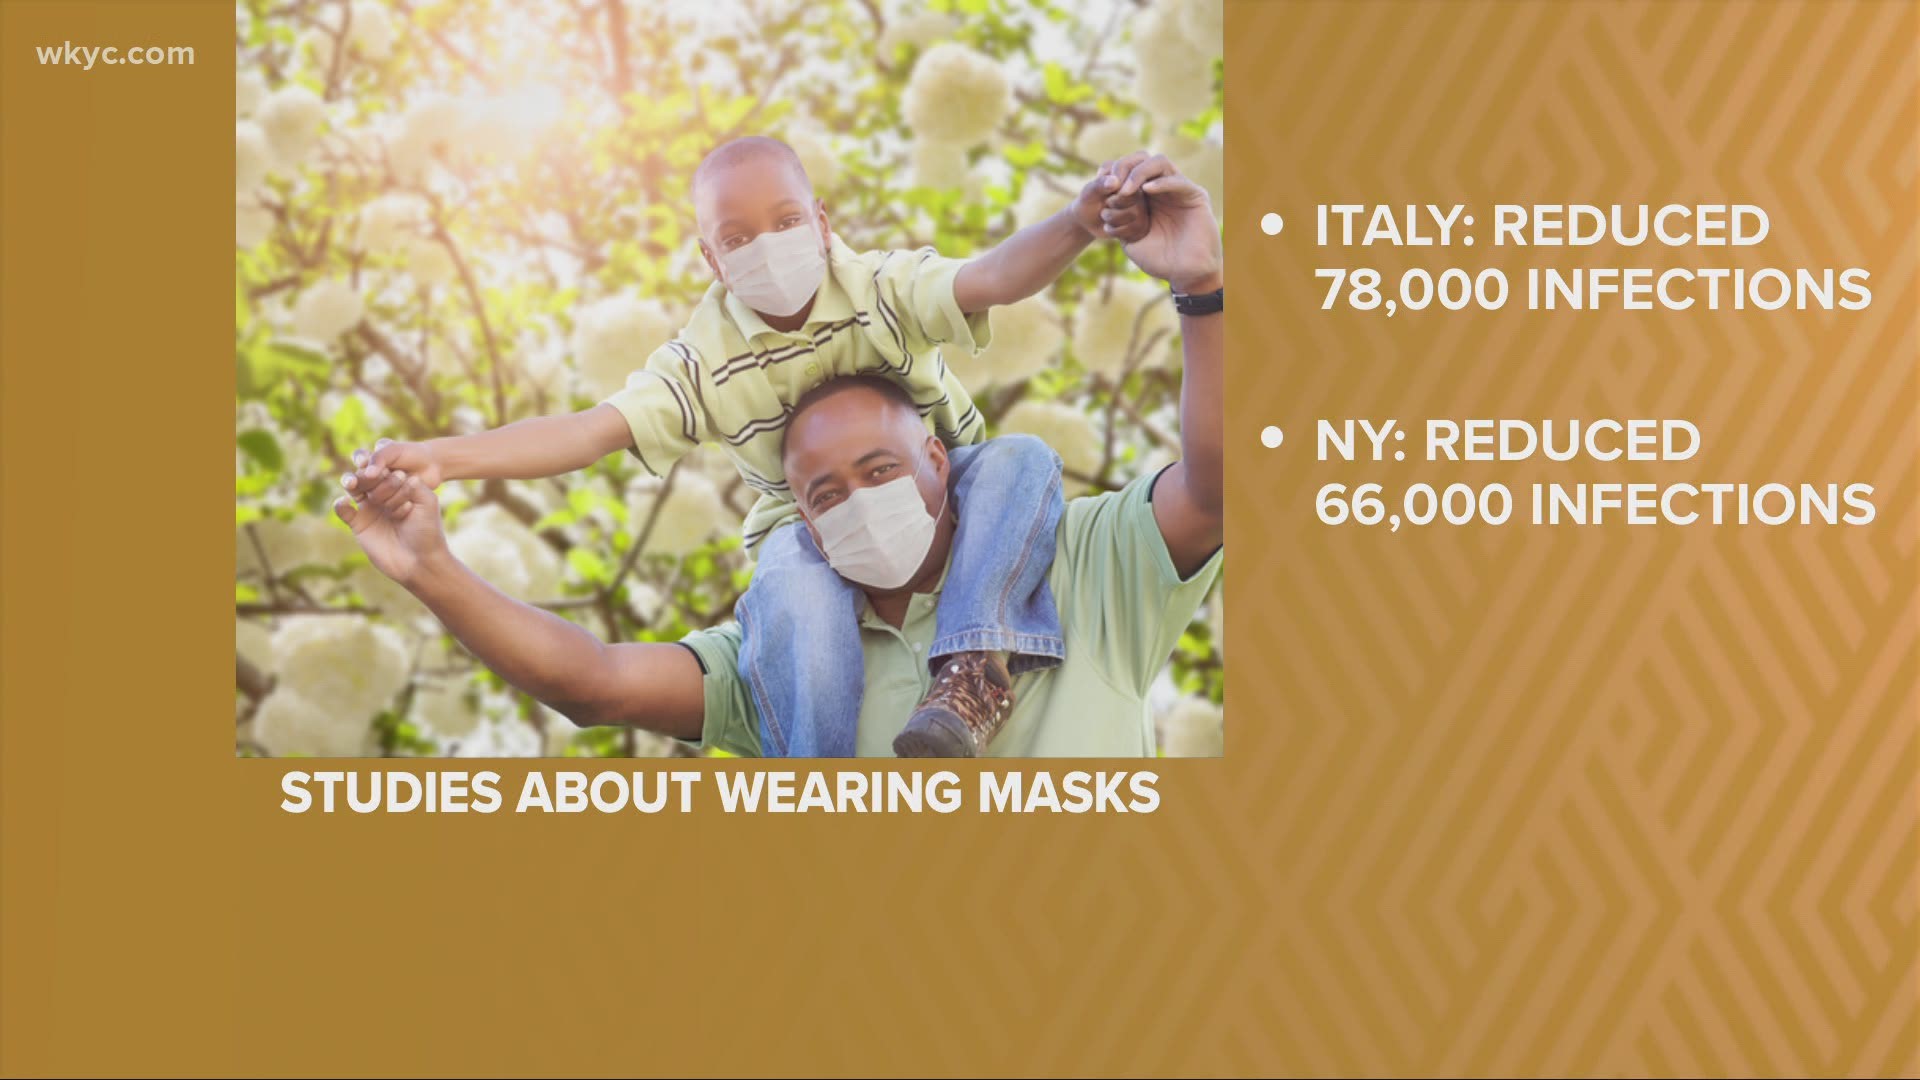 The Governor urged everyone to wear a mask in public today.  Studies prove that wearing a mask does work.